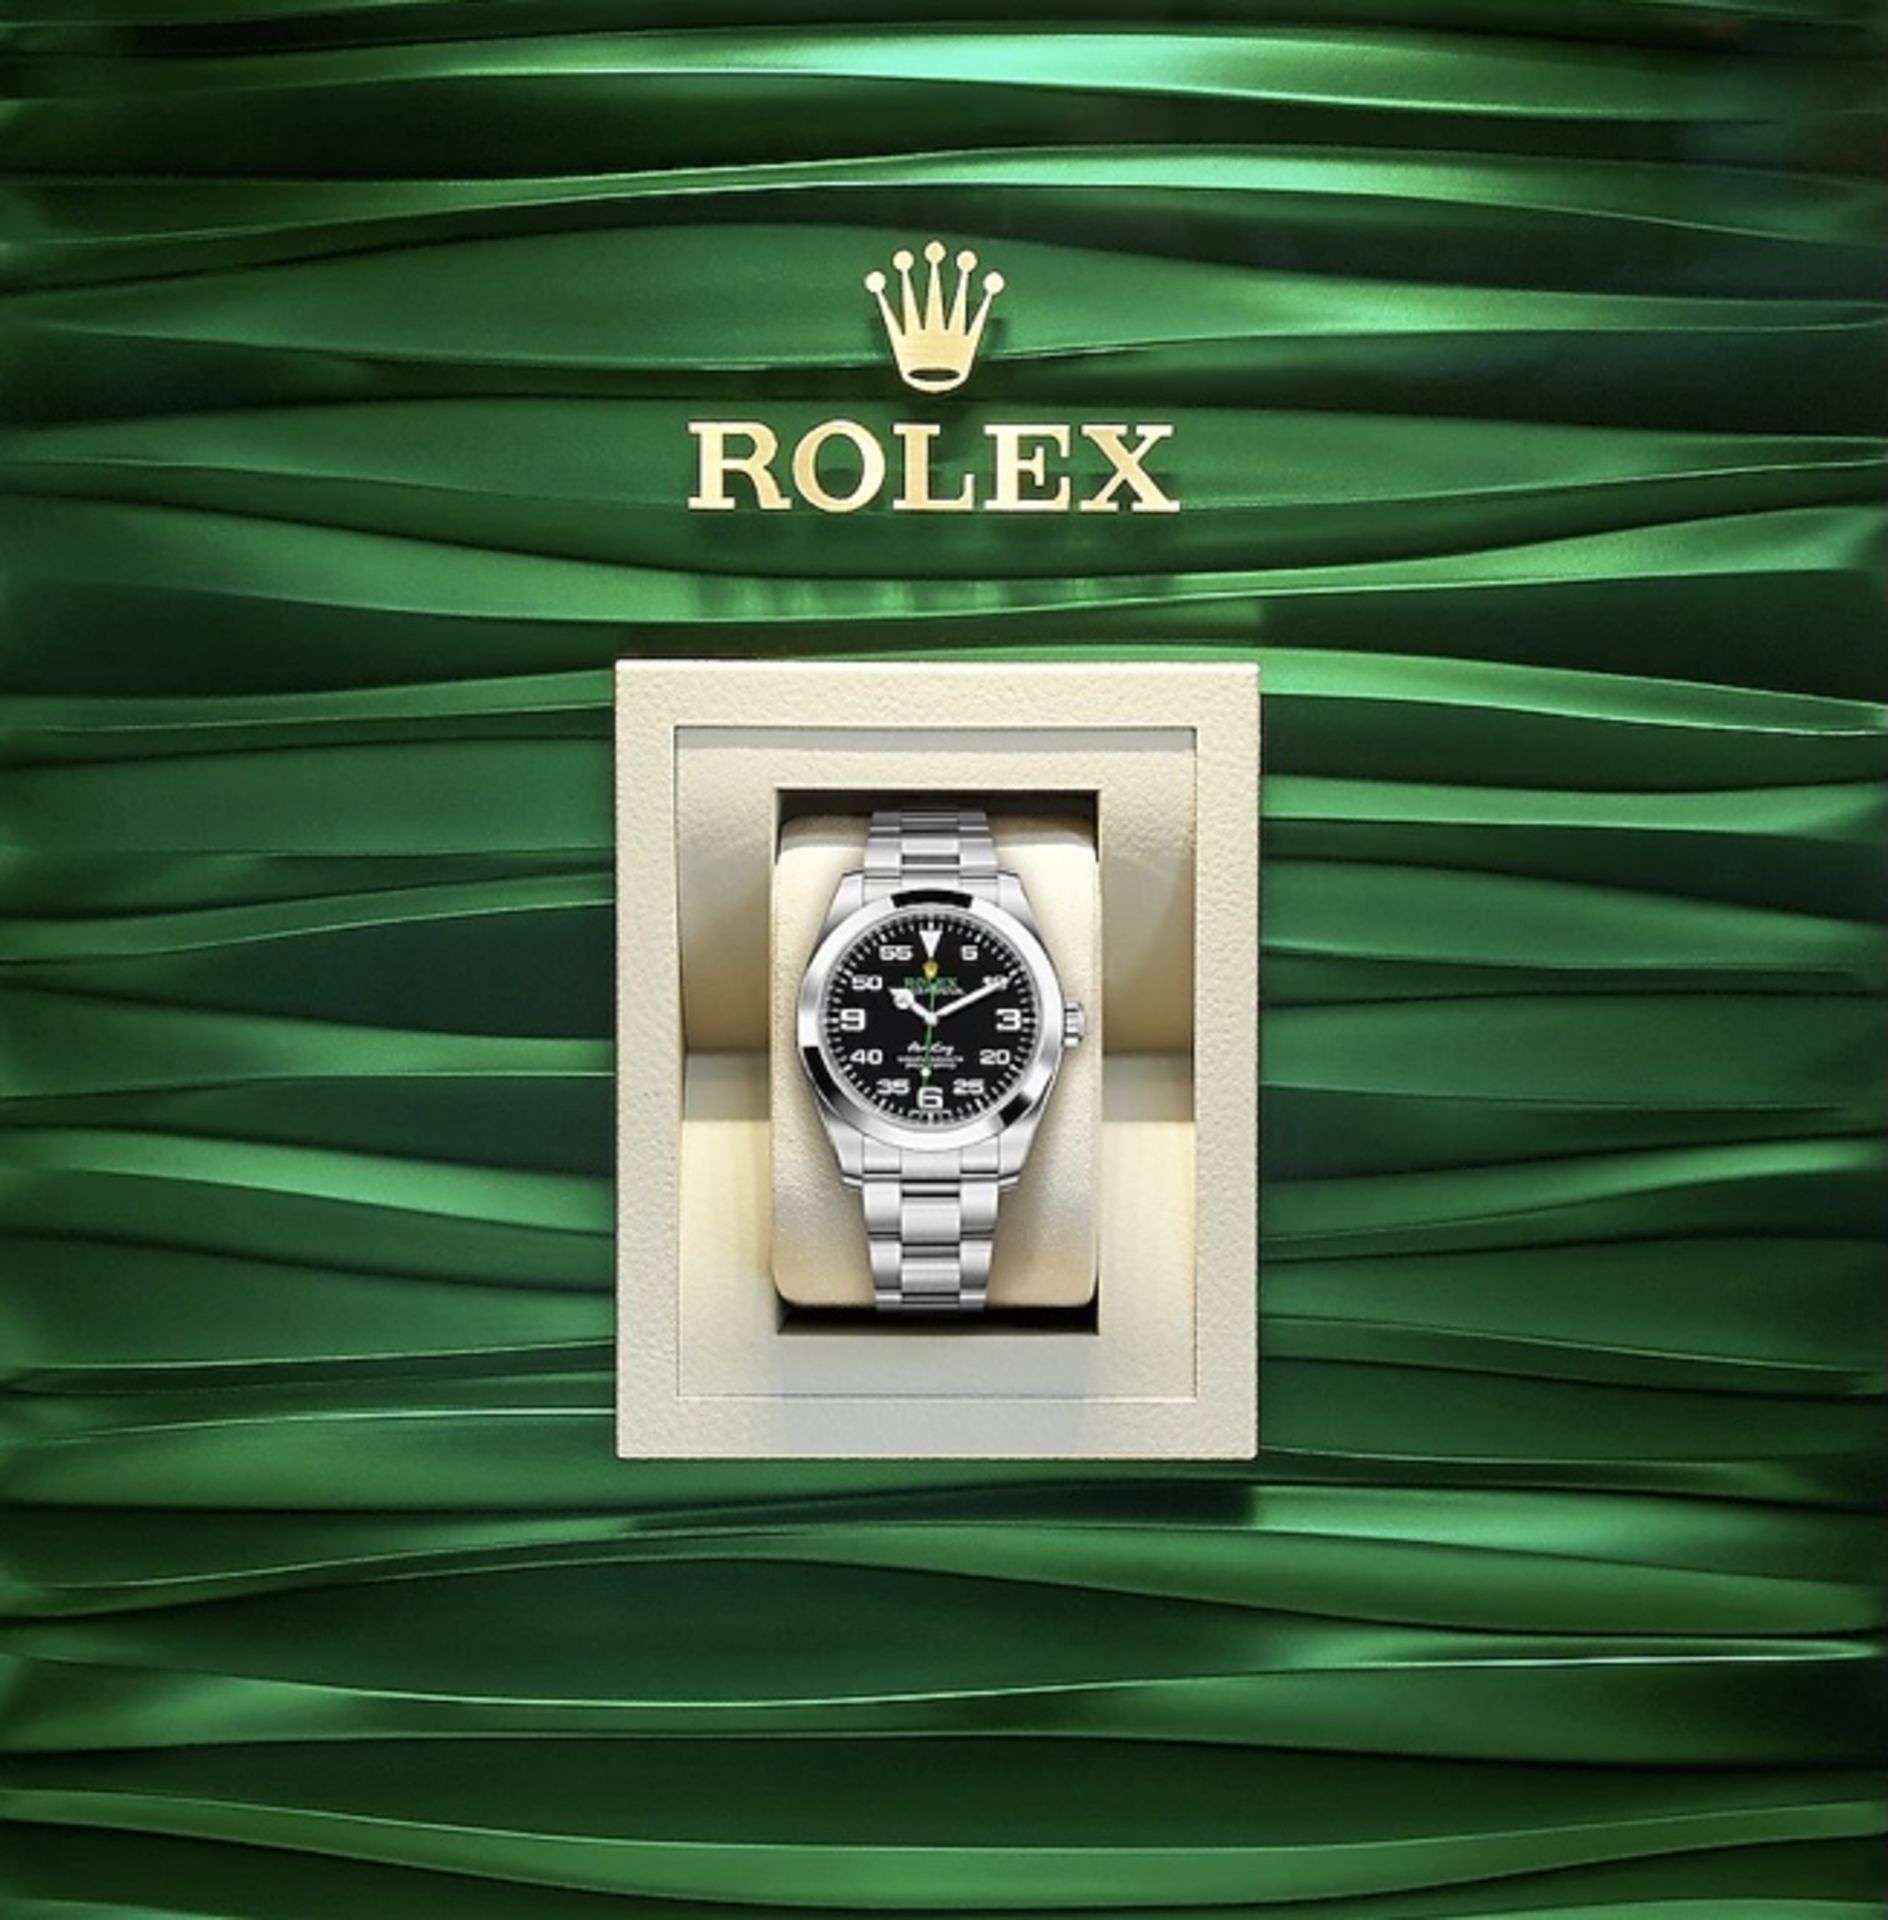 ROLEX AIR-KING 40mm OYSTERSTEEL PROFESSIONAL / SPORTS MODEL (2020 WATCH) FULL SET AND READY FOR XMAS - Image 2 of 2